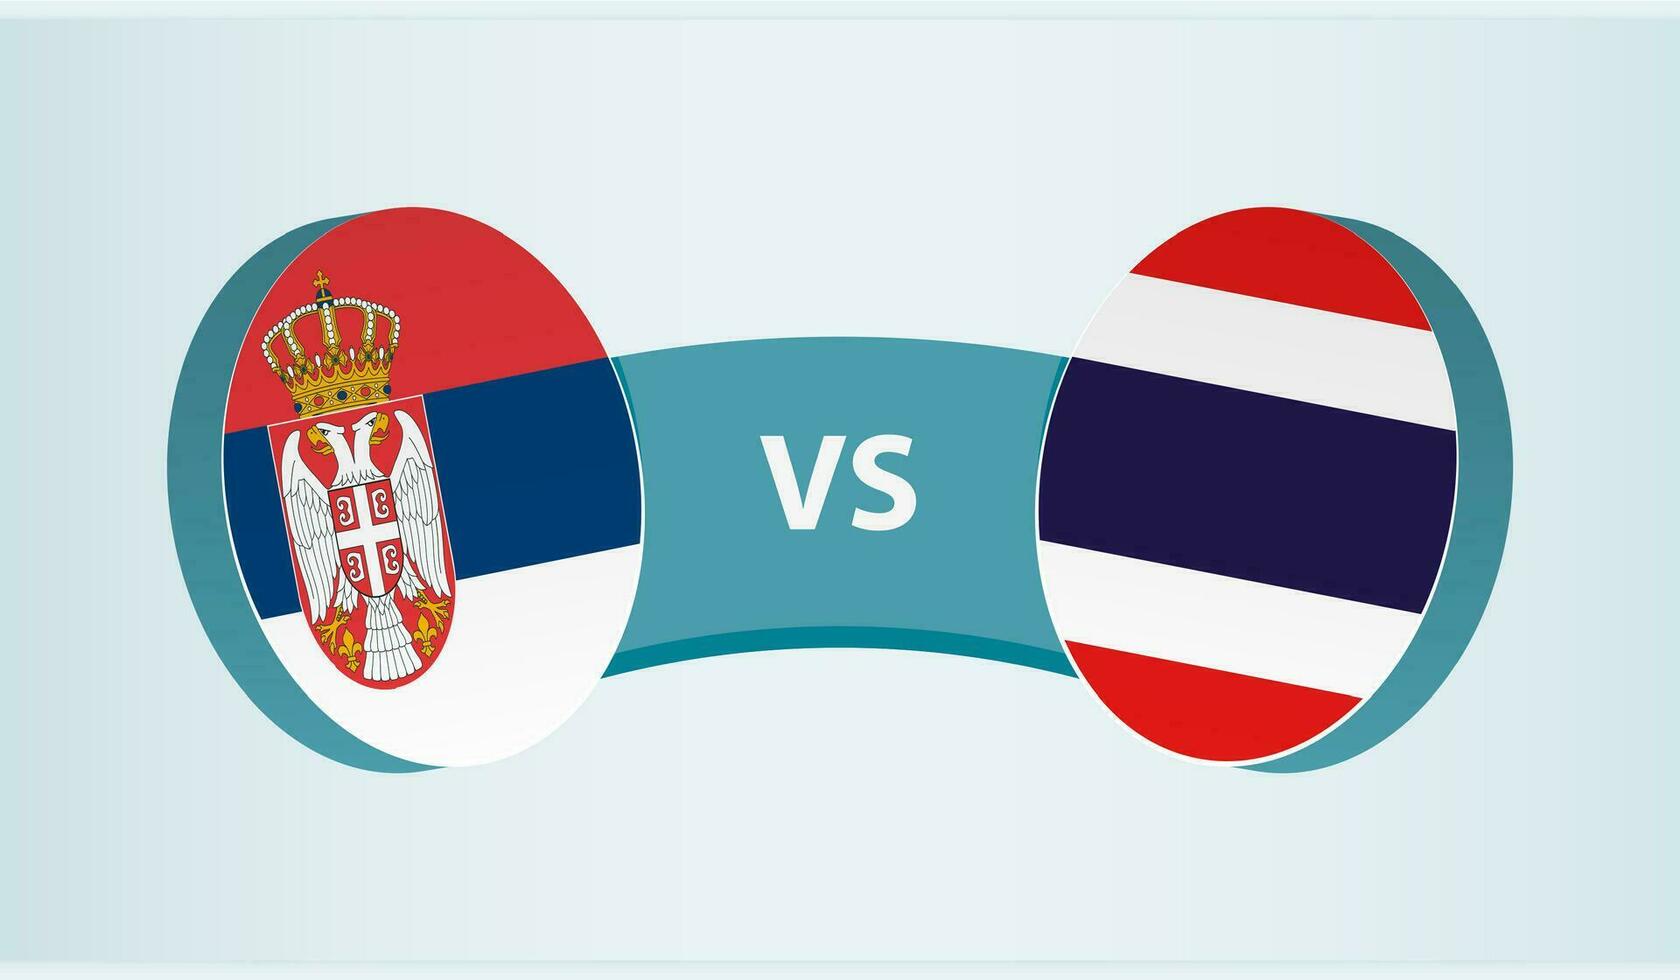 Serbia versus Thailand, team sports competition concept. vector